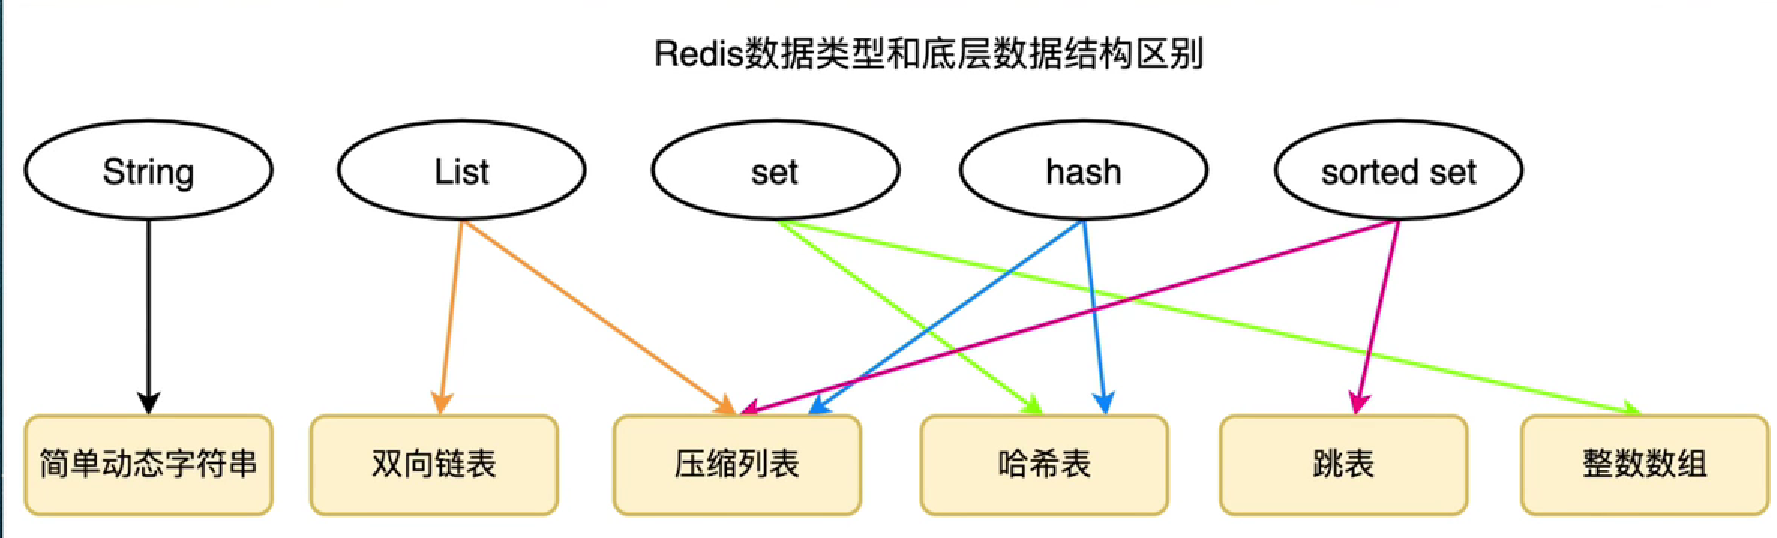 【<span style='color:red;'>Redis</span>面试题】<span style='color:red;'>Redis</span><span style='color:red;'>常见</span><span style='color:red;'>的</span><span style='color:red;'>一些</span>高频面试题